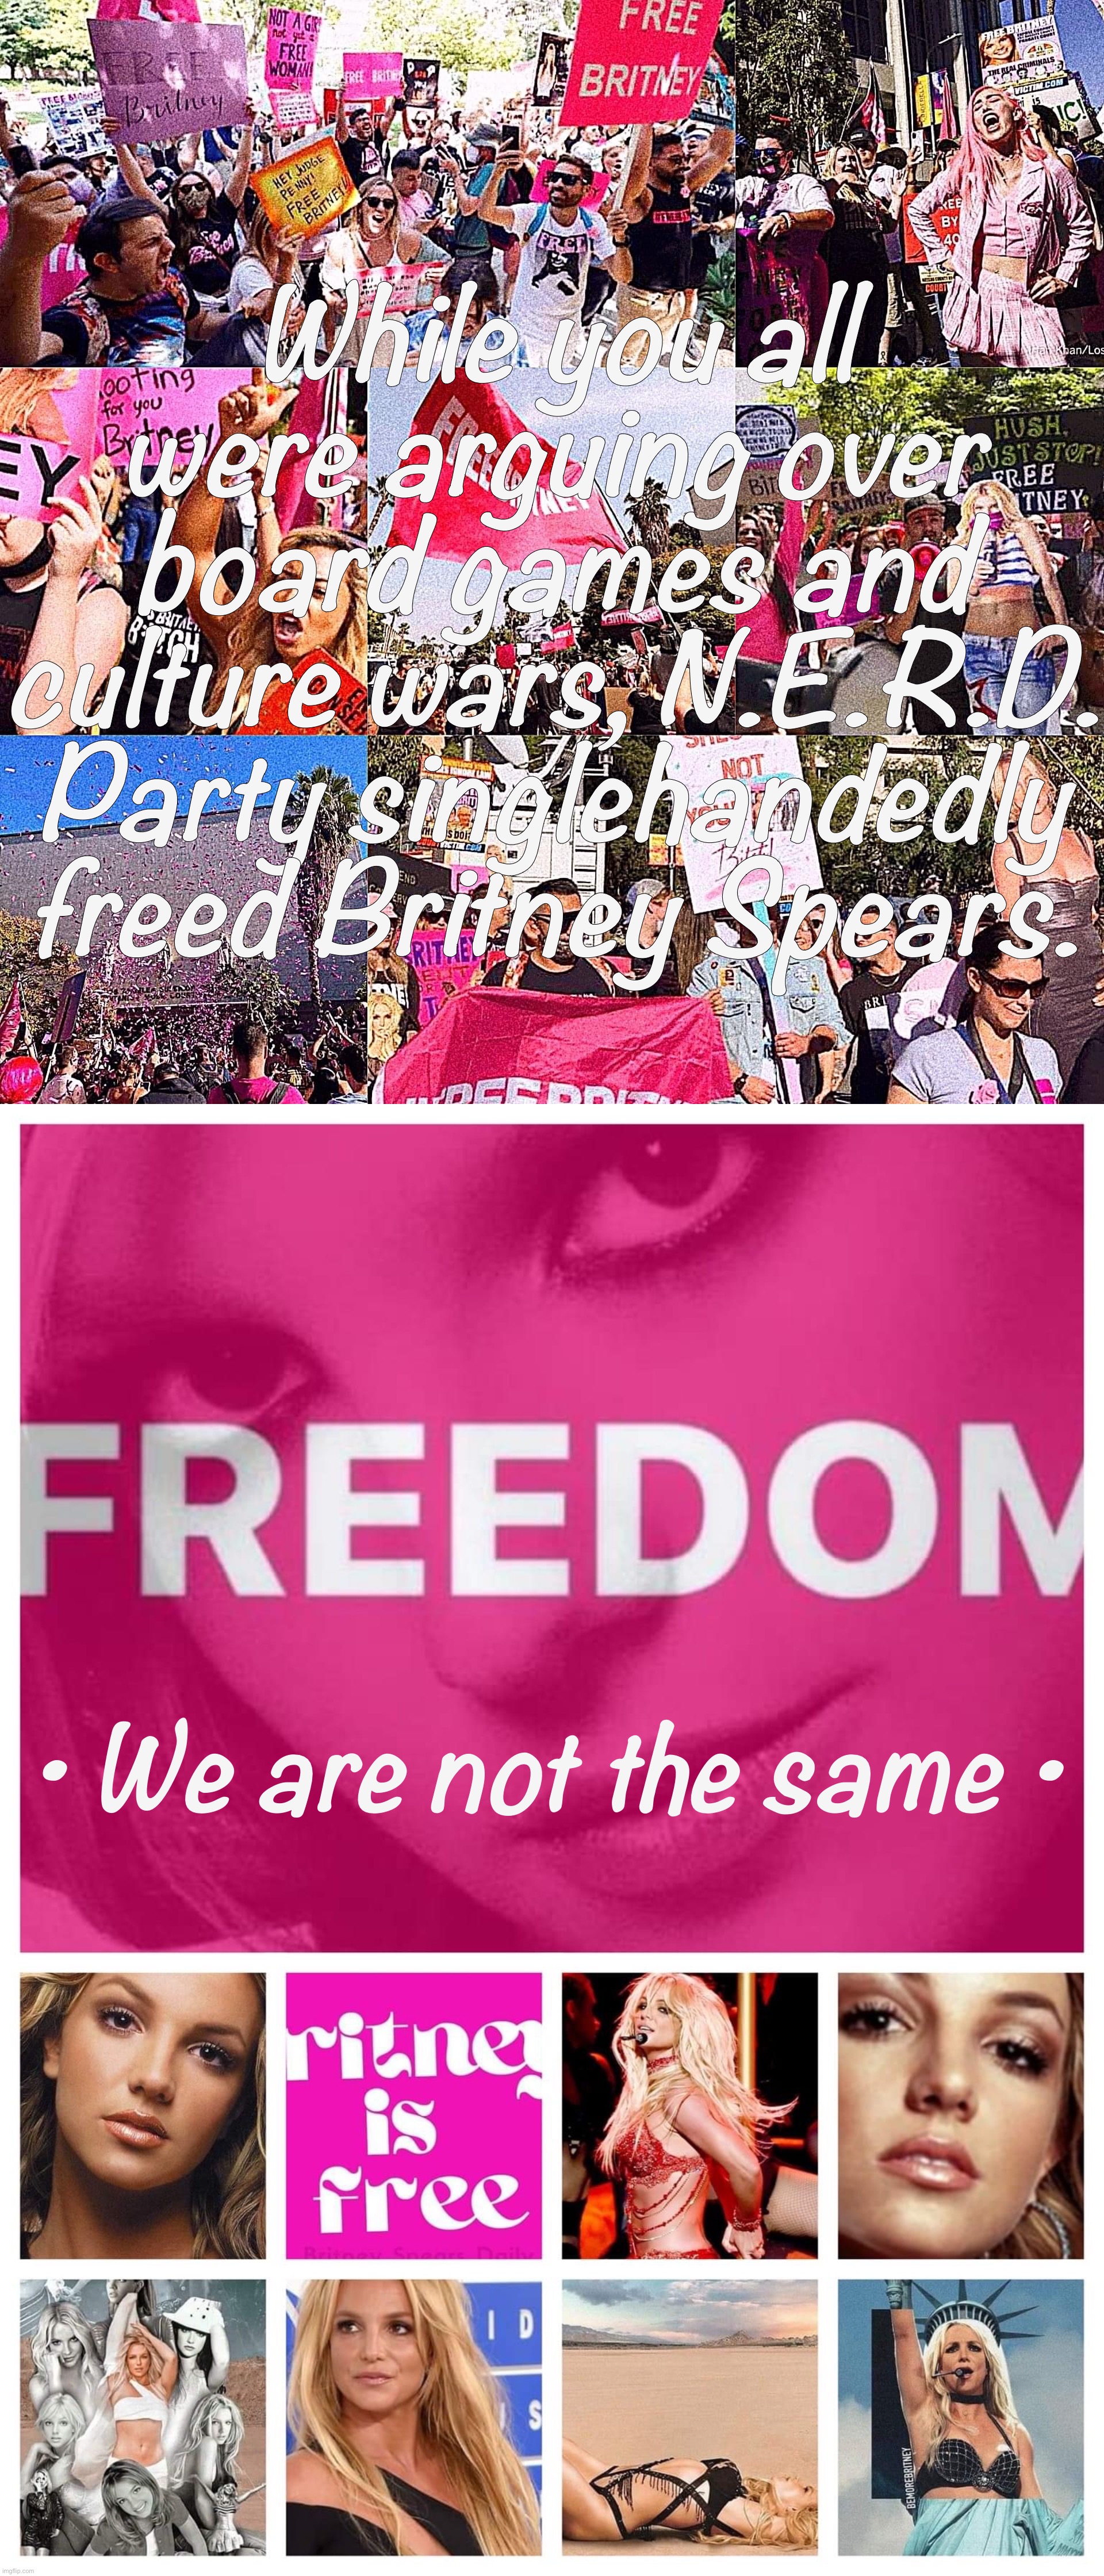 Britney Spears is finally free thanks to N.E.R.D. Party’s efforts. Credit too to the Libertarian Alliance as a whole. | While you all were arguing over board games and culture wars, N.E.R.D. Party singlehandedly freed Britney Spears. • We are not the same • | image tagged in free britney,nerd party,libertarian alliance,britney spears,leave britney alone | made w/ Imgflip meme maker